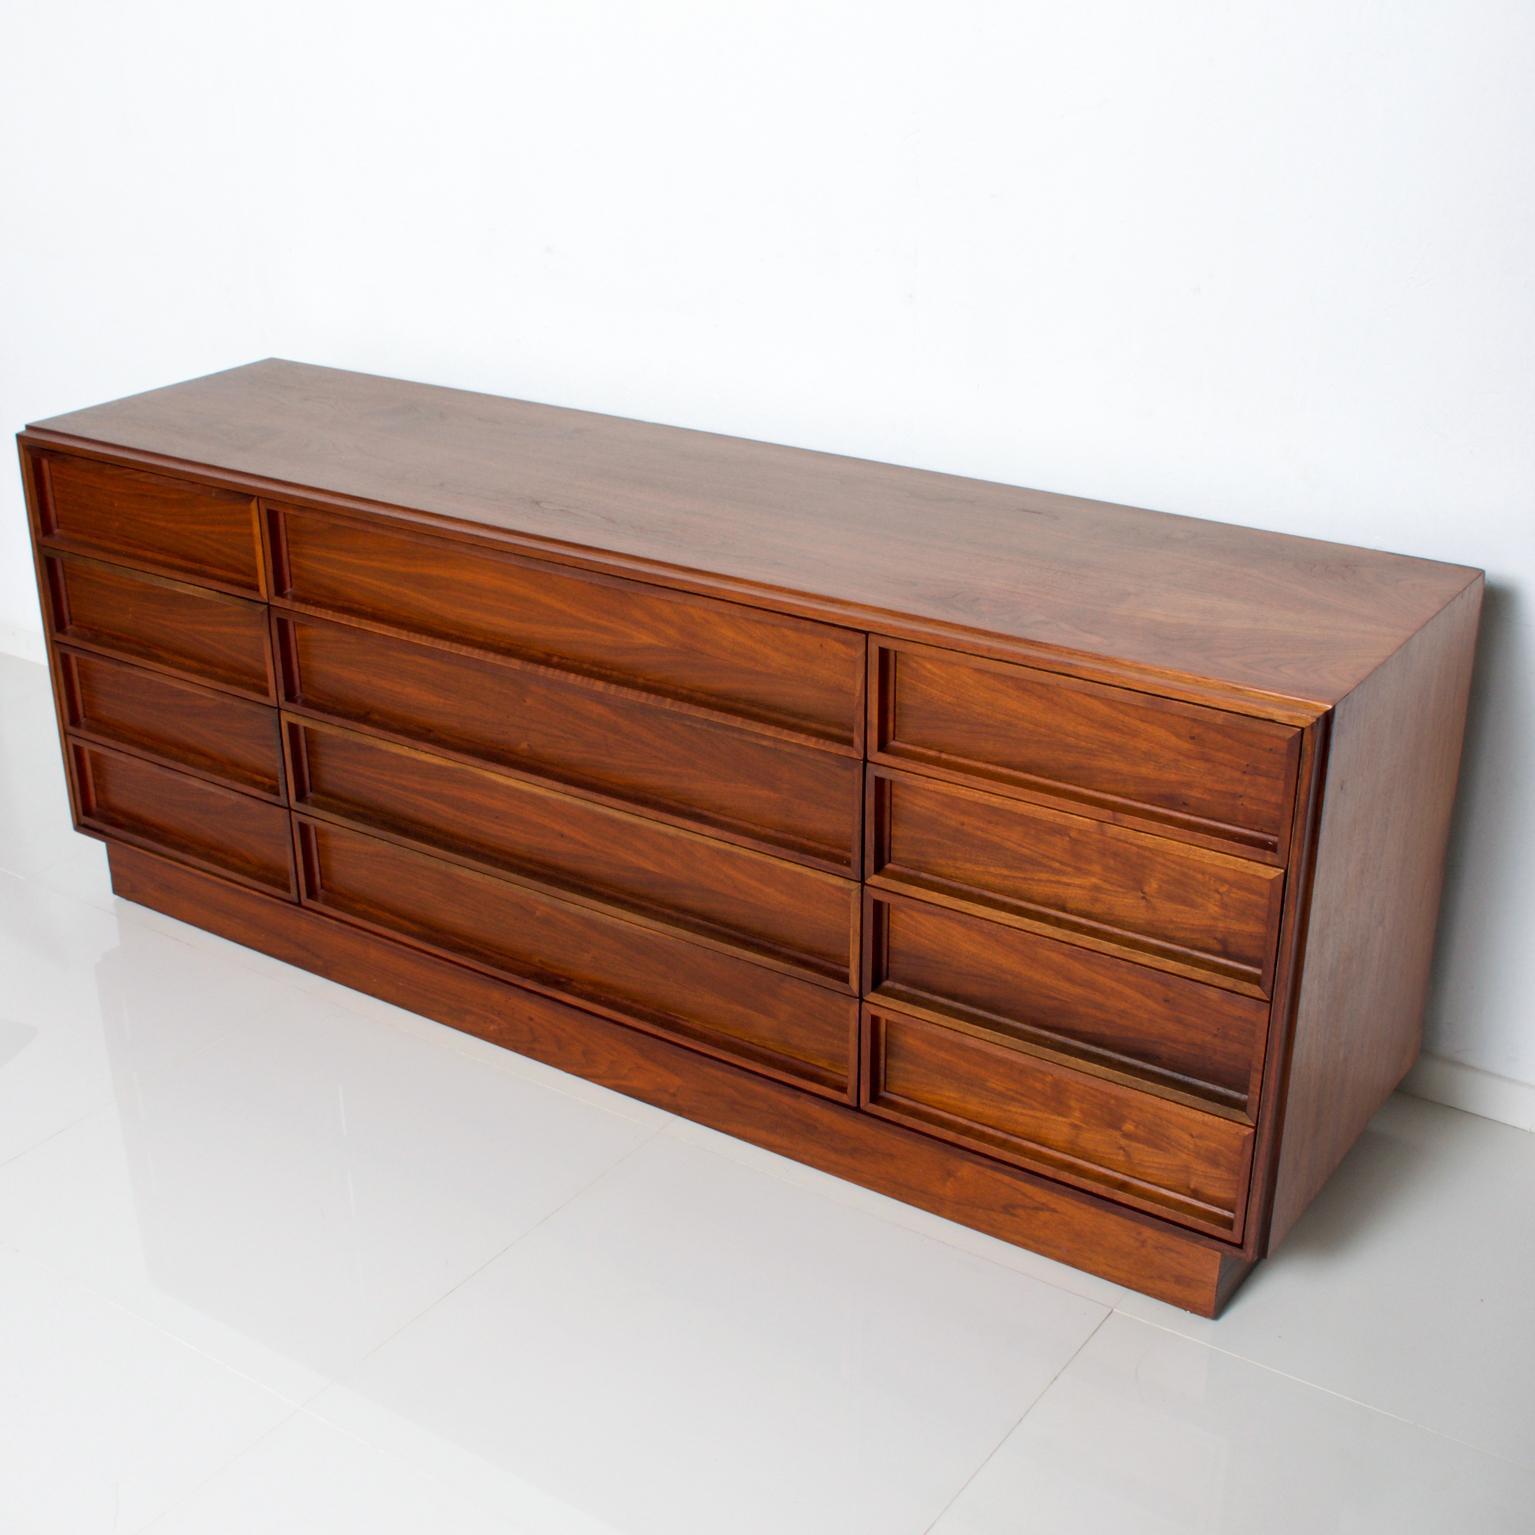 For Your Consideration: Clean Classic Danish Modern Walnut Wood Dresser by John Keal for Brown Saltman
Original Unrestored Very Good Vintage Condition. Consider as a storage buffet or chest.
Dimensions are: 72